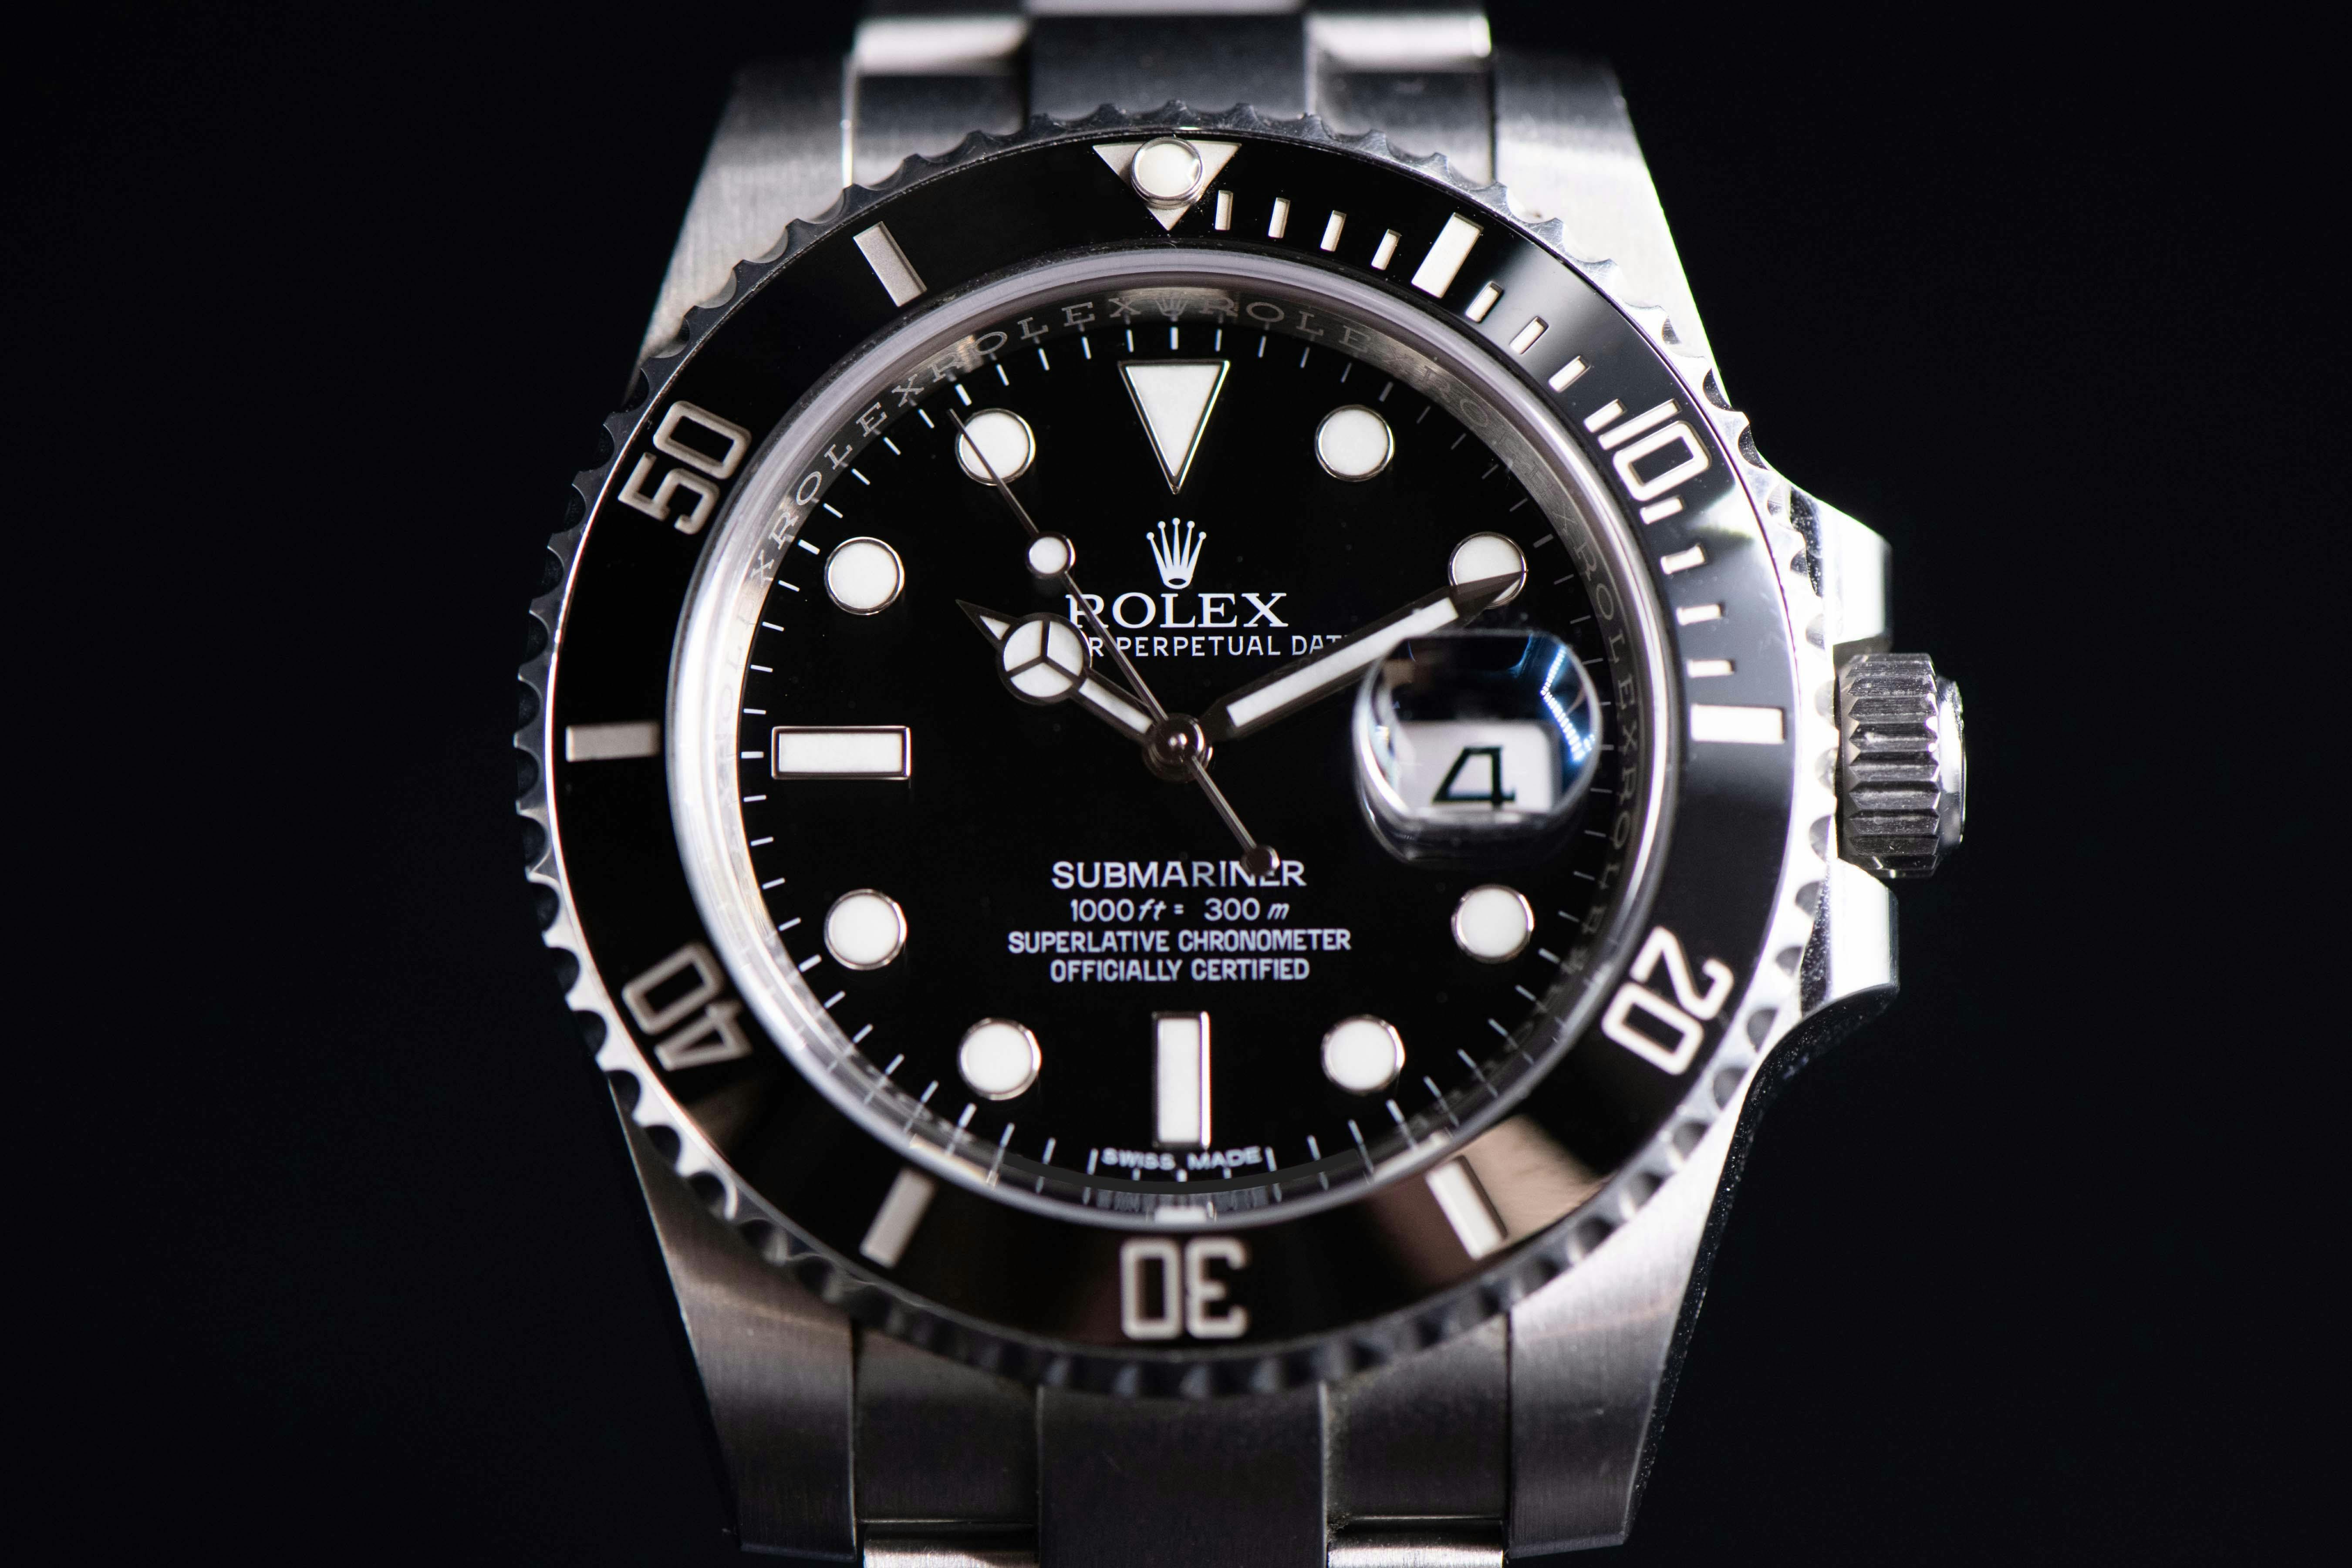 2010 Rolex Submariner for sale by auction in London, United Kingdom